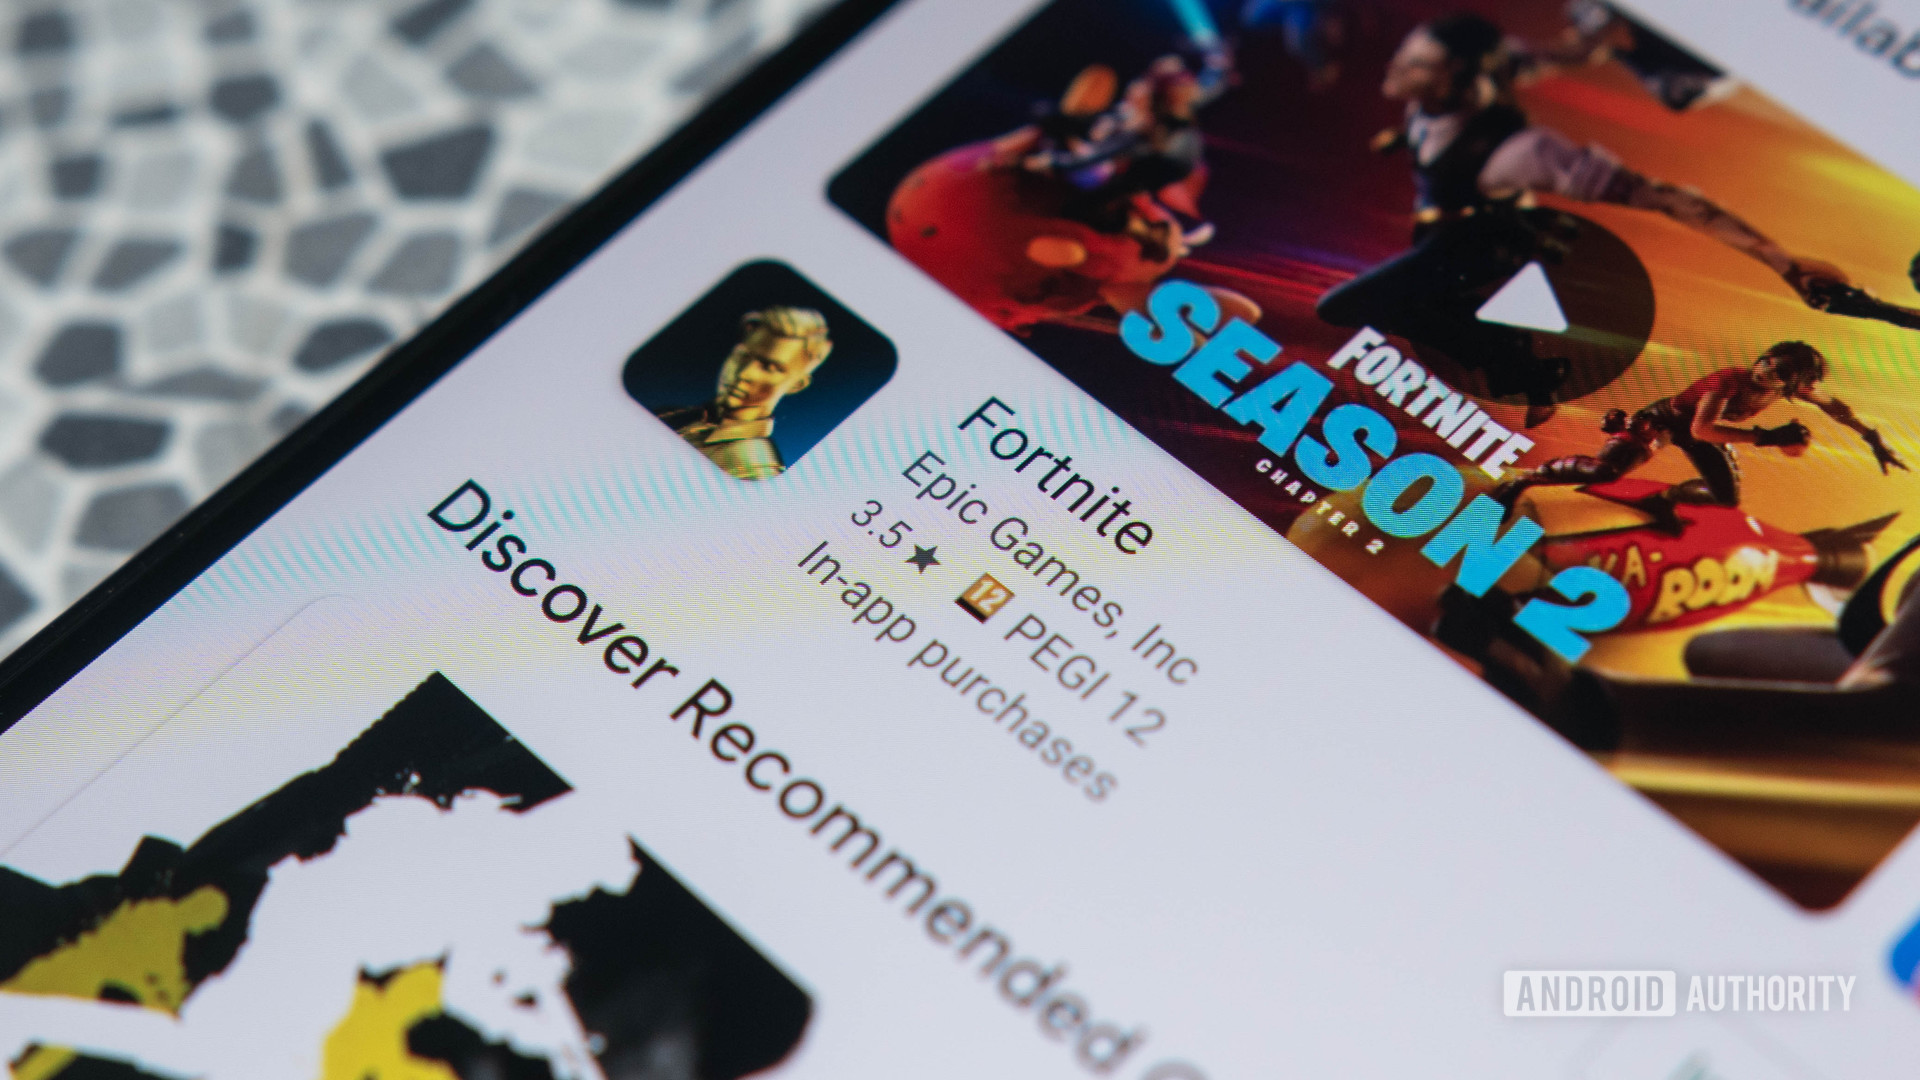 Fortnite pulled from Google Play Store; Epic files suit against Google  (Update) - Android Authority